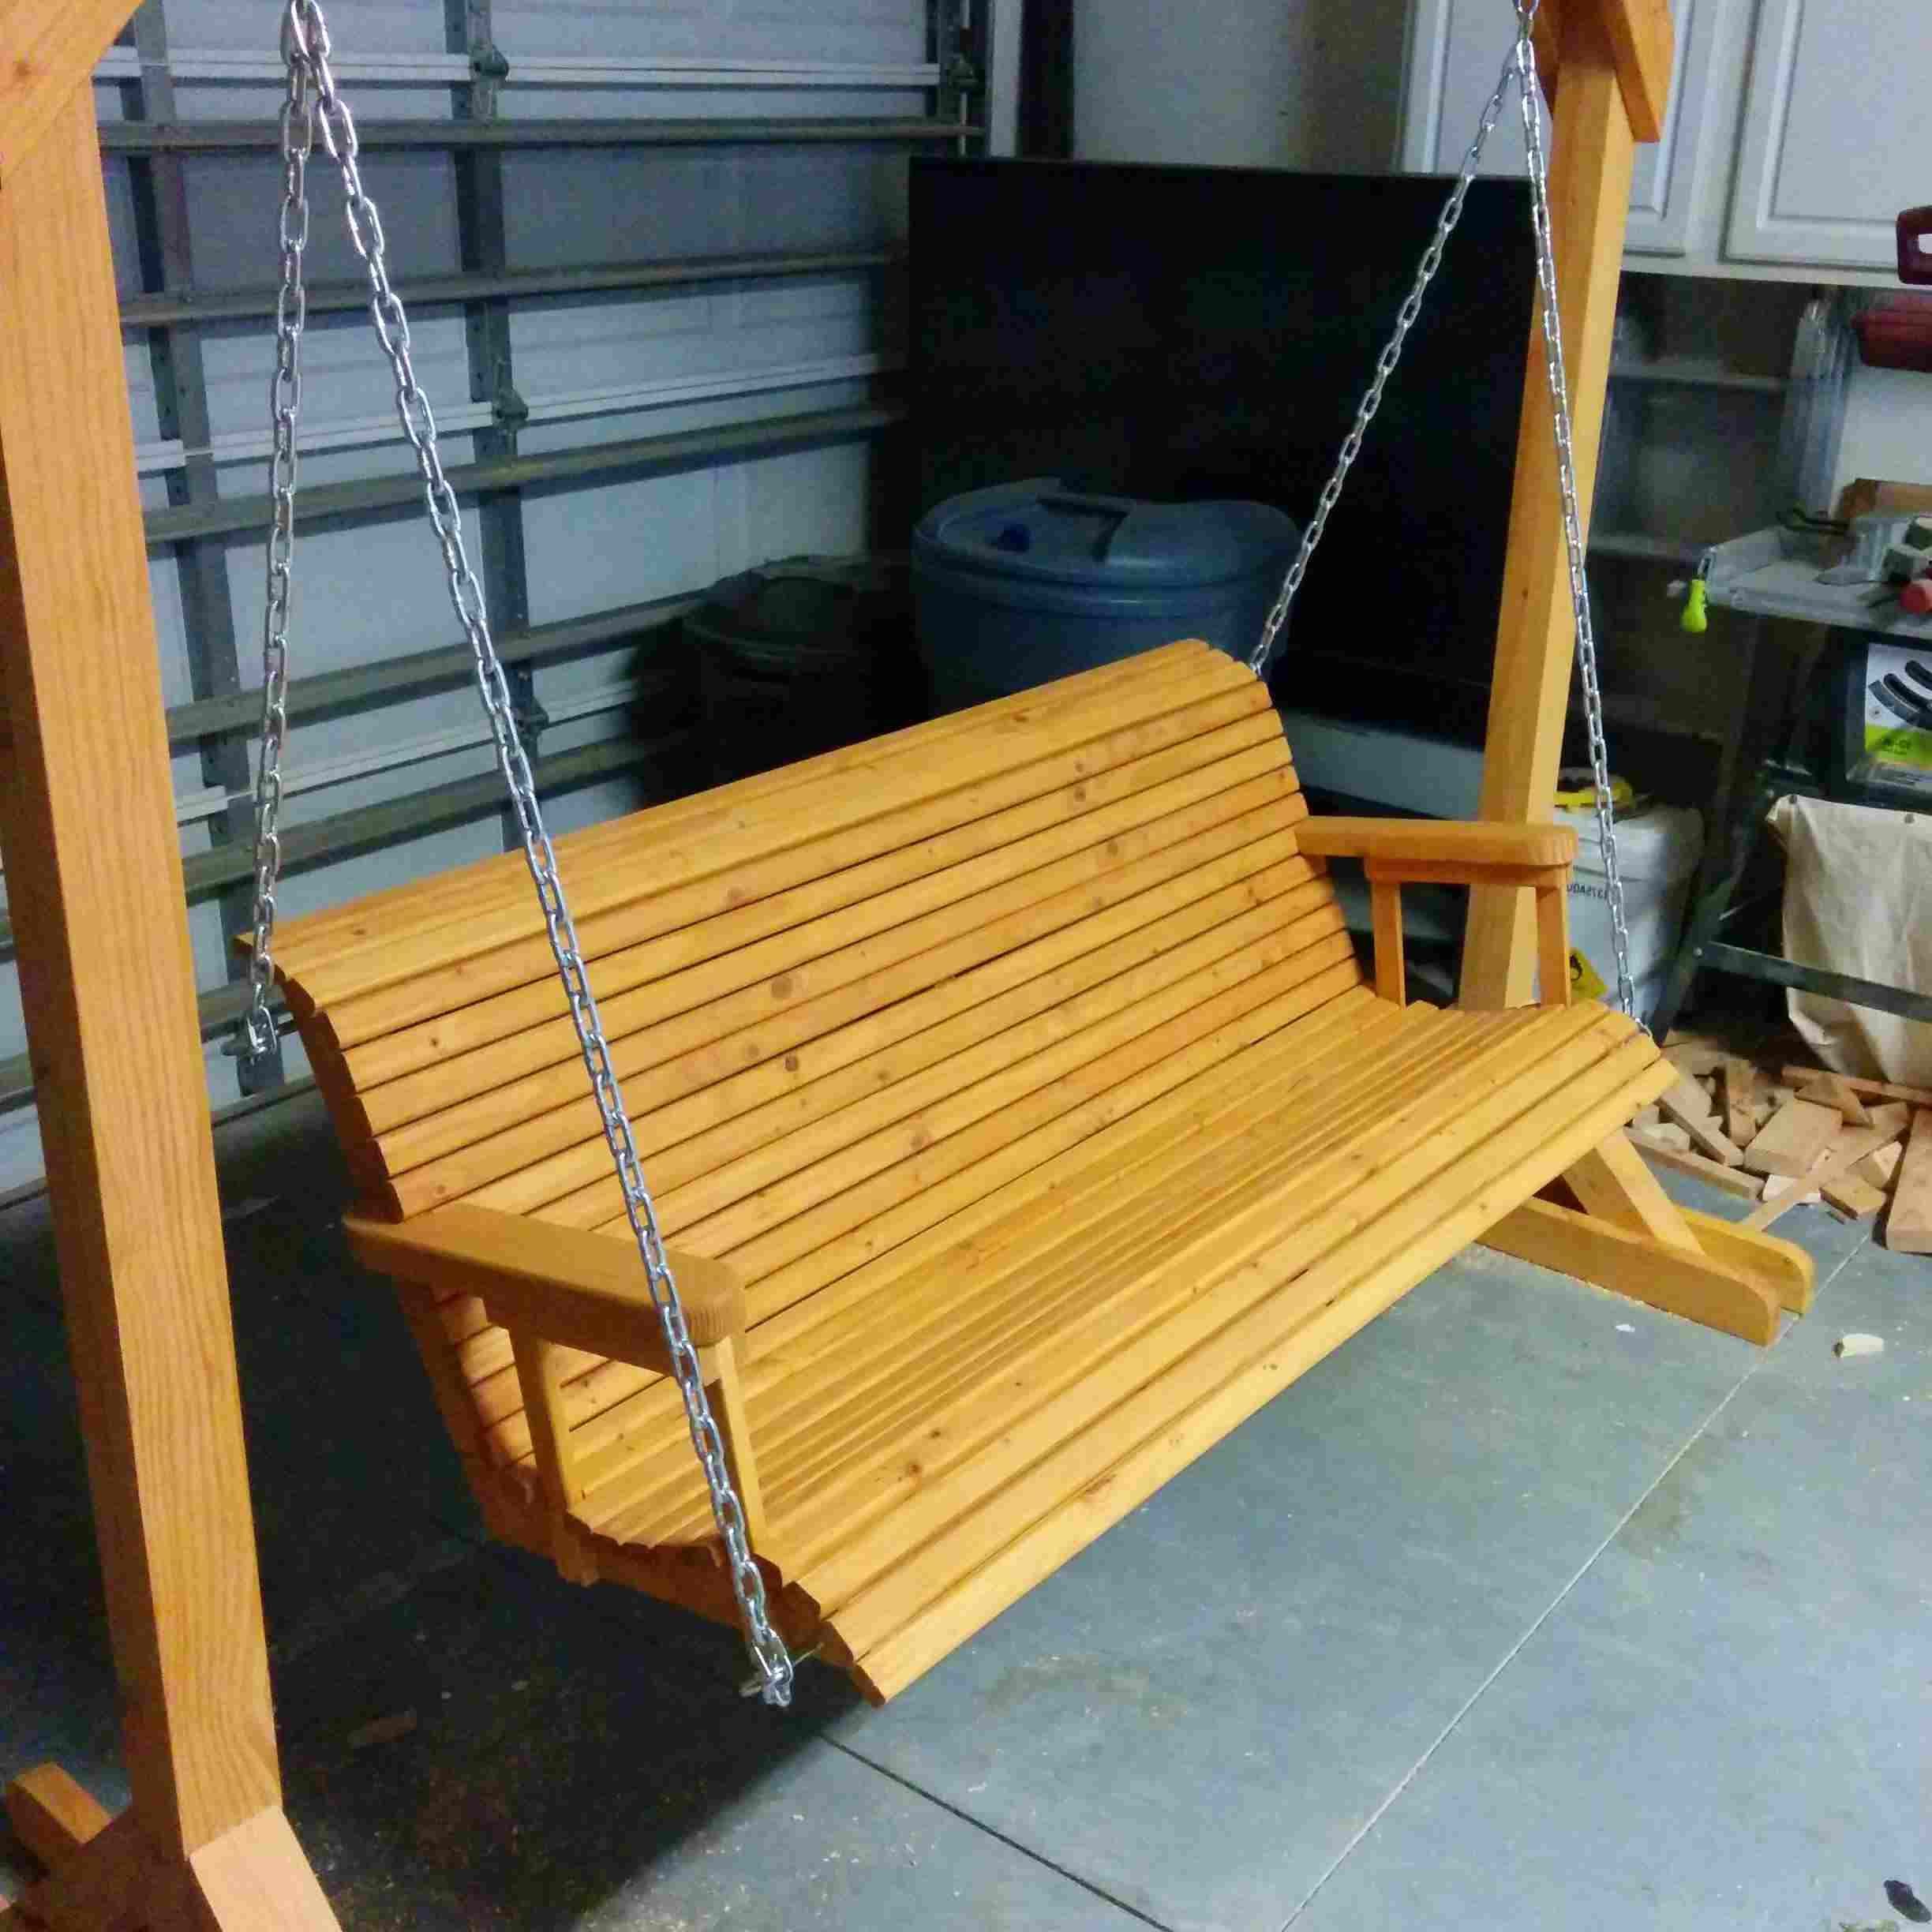 12 Free Porch Swing Plans To Build At Home Pertaining To Recent Porch Swings (View 16 of 30)